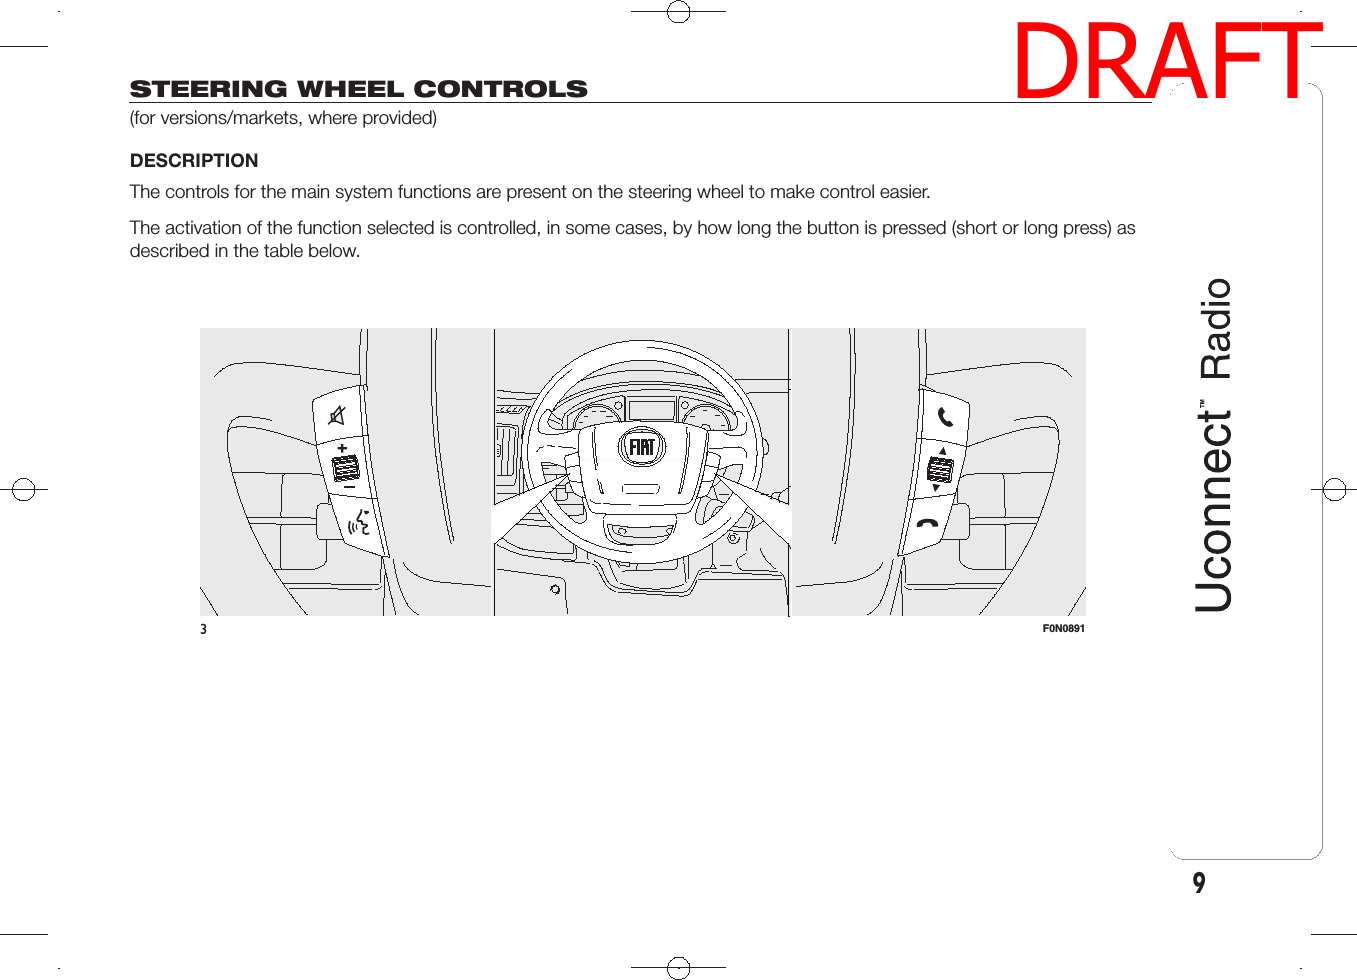 STEERING WHEEL CONTROLS(for versions/markets, where provided)DESCRIPTIONThe controls for the main system functions are present on the steering wheel to make control easier.The activation of the function selected is controlled, in some cases, by how long the button is pressed (short or long press) asdescribed in the table below.3F0N08919DRAFT